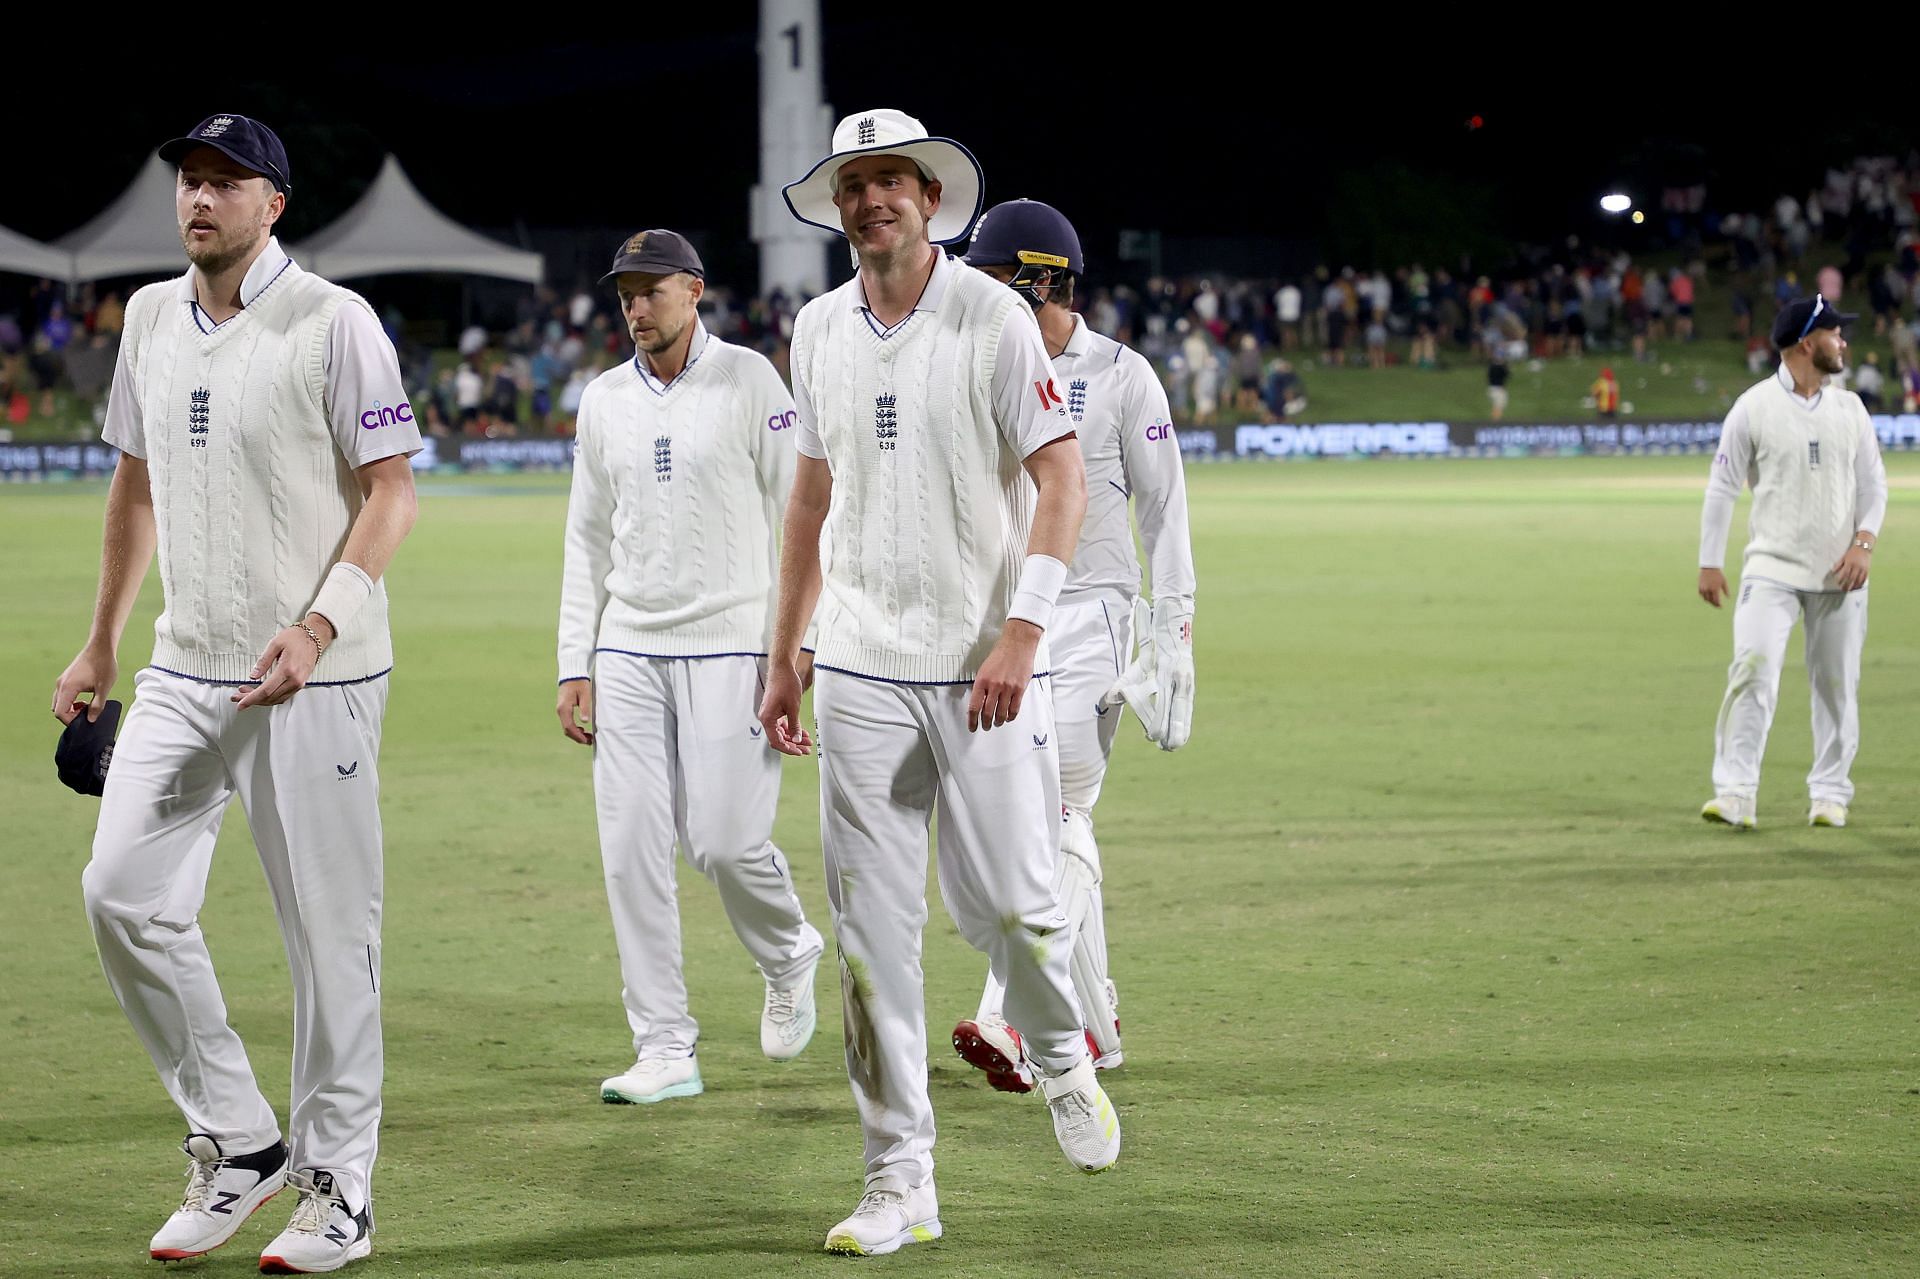 Stuart Broad leads England off the ground. (Credits: Getty)